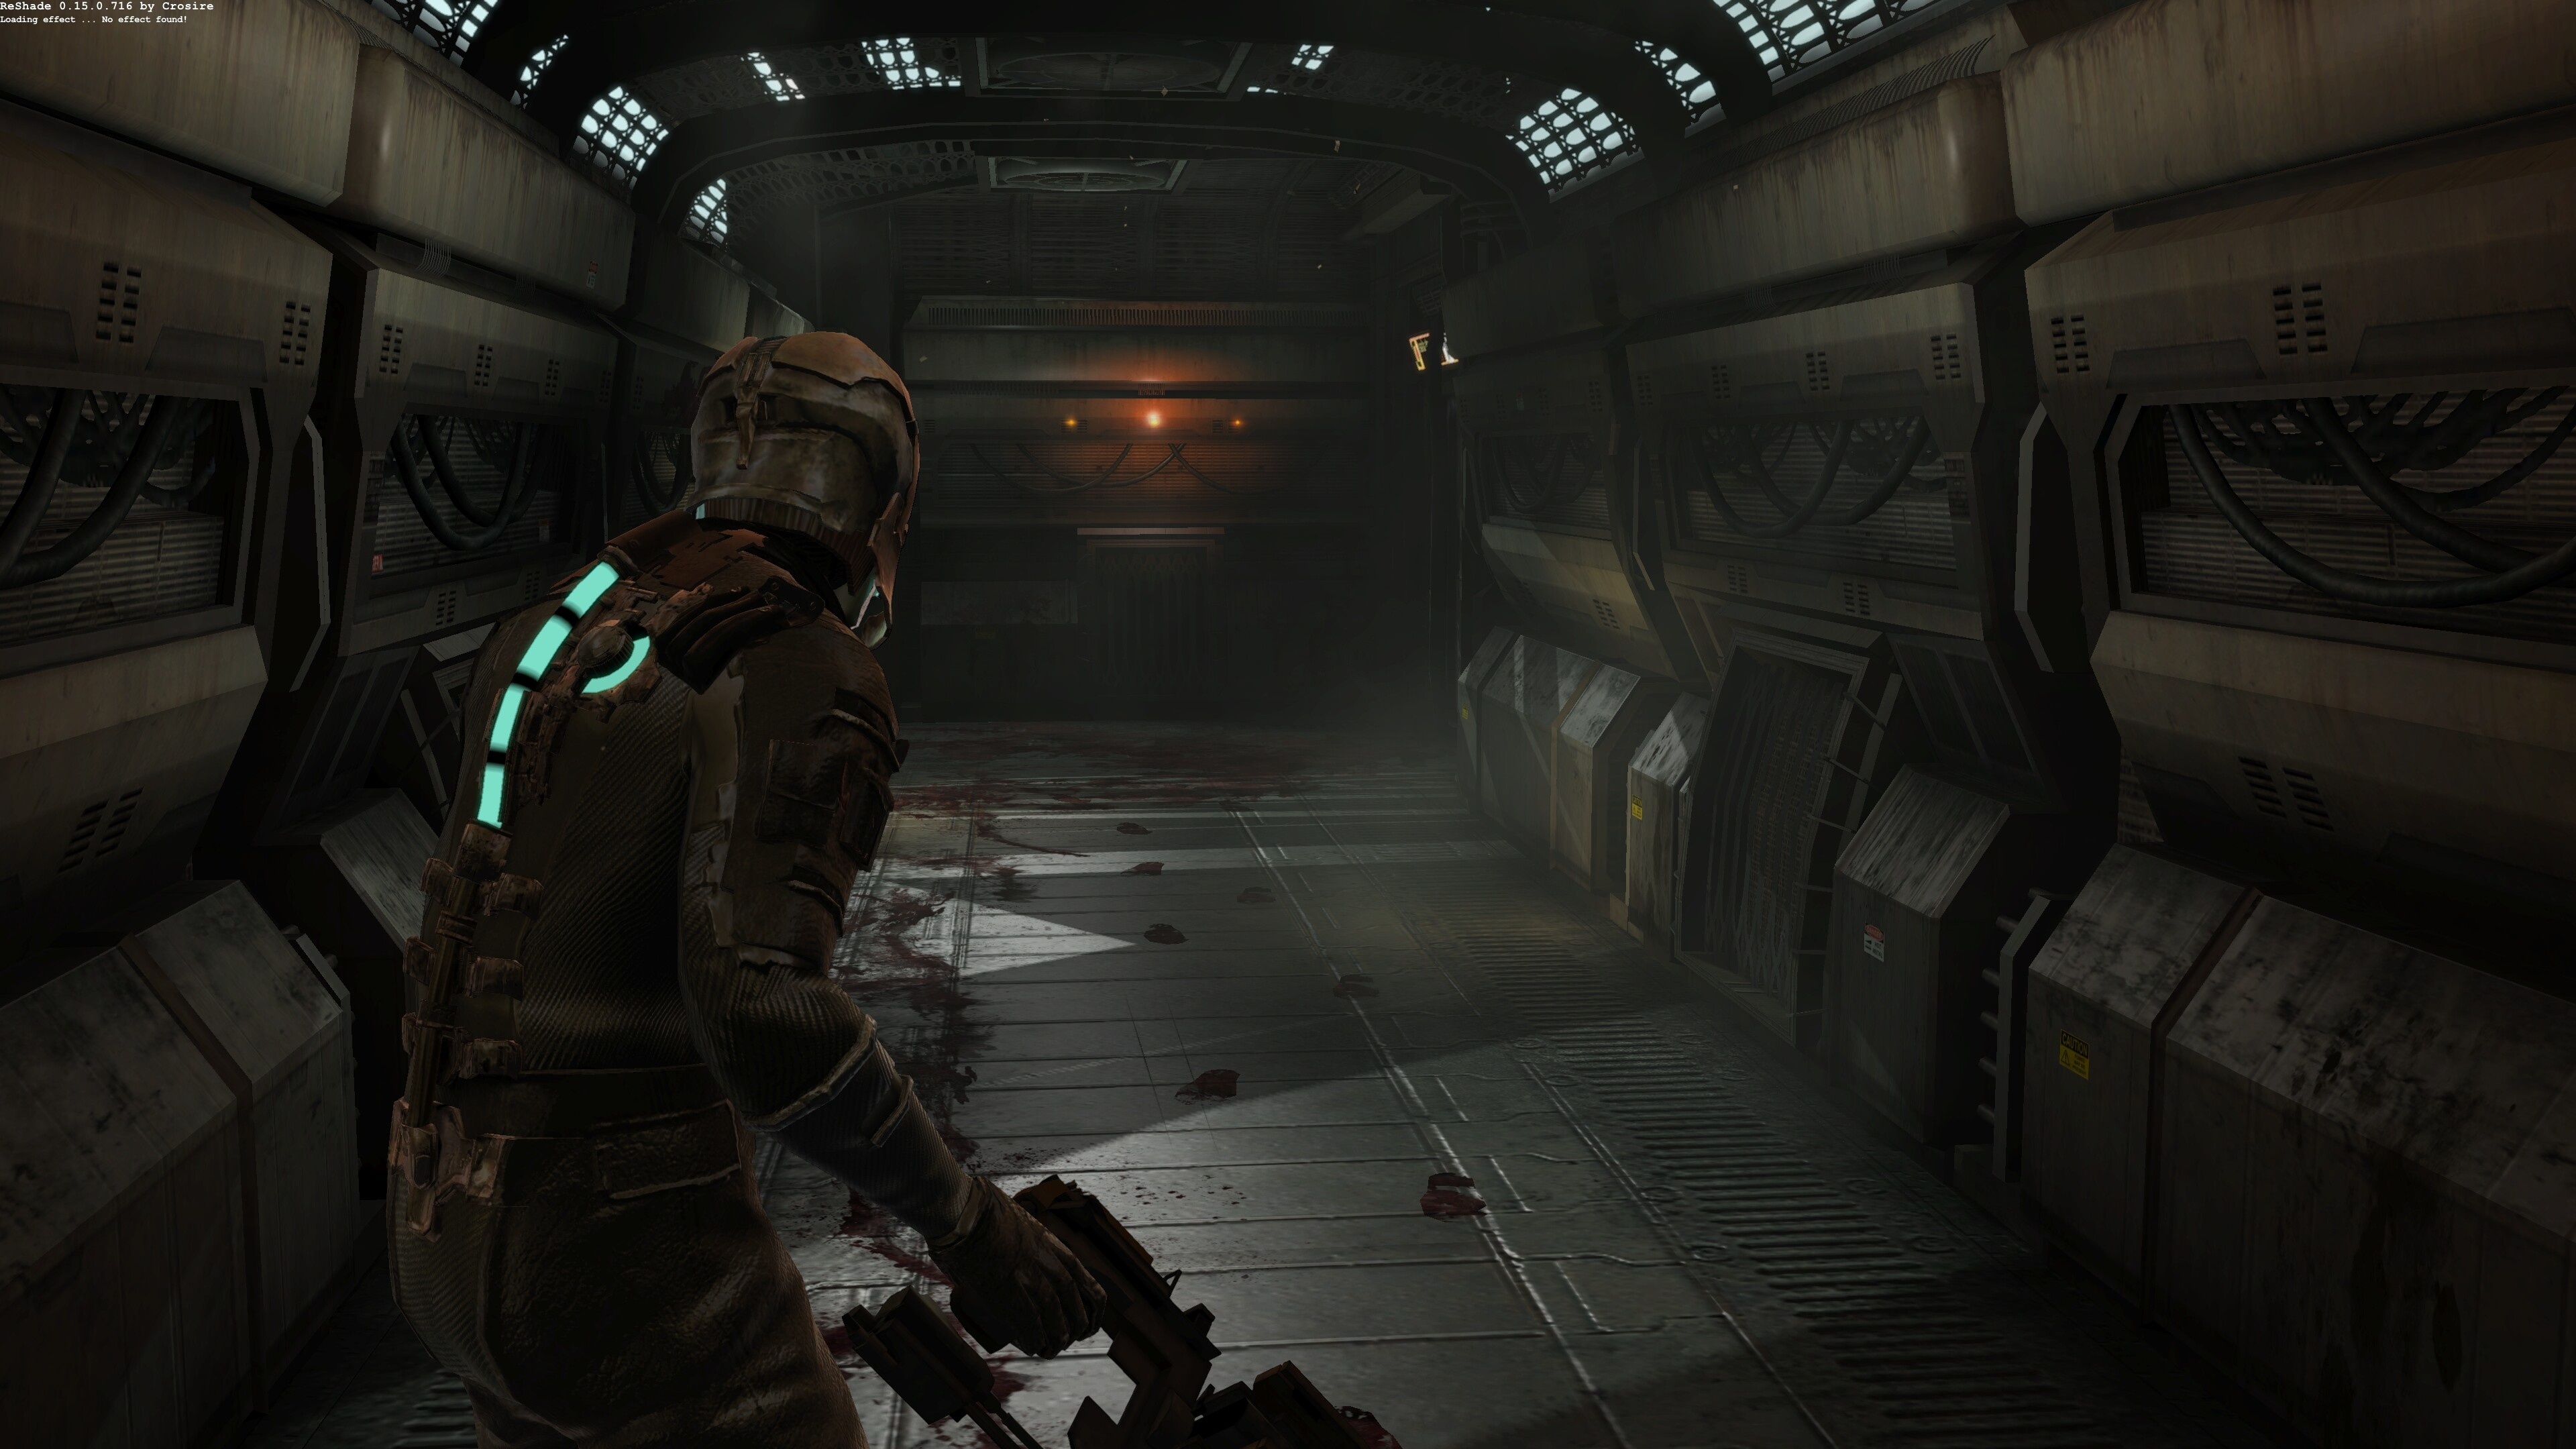 Dead Space: Game, set in a 26th century science fiction universe. 3840x2160 4K Wallpaper.